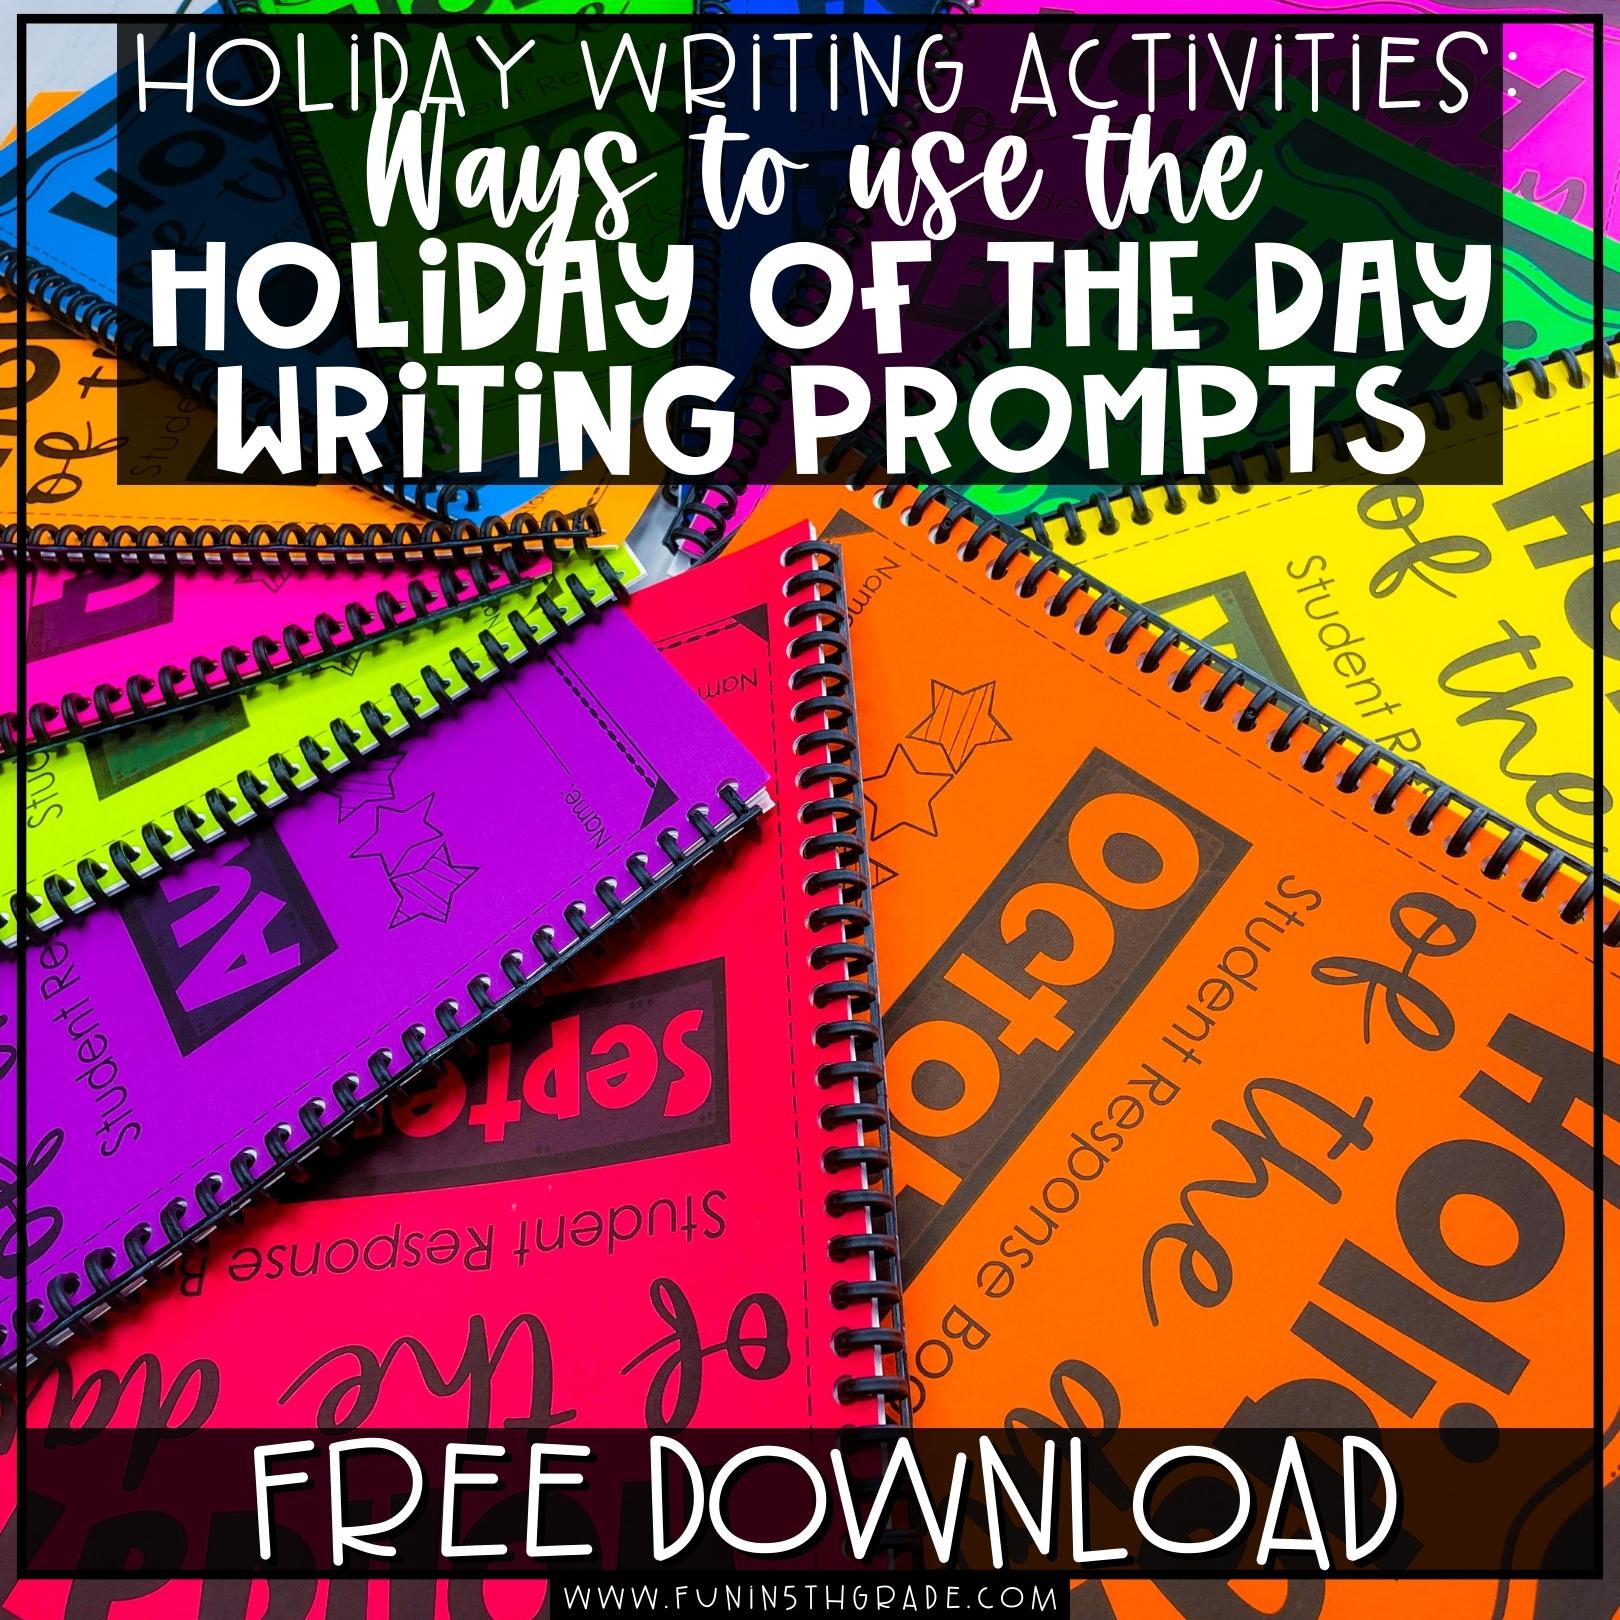 Holiday Writing Activities Ways to use the holiday of the day writing prompts blog image with picture of the National Taco Day writing prompt in the background